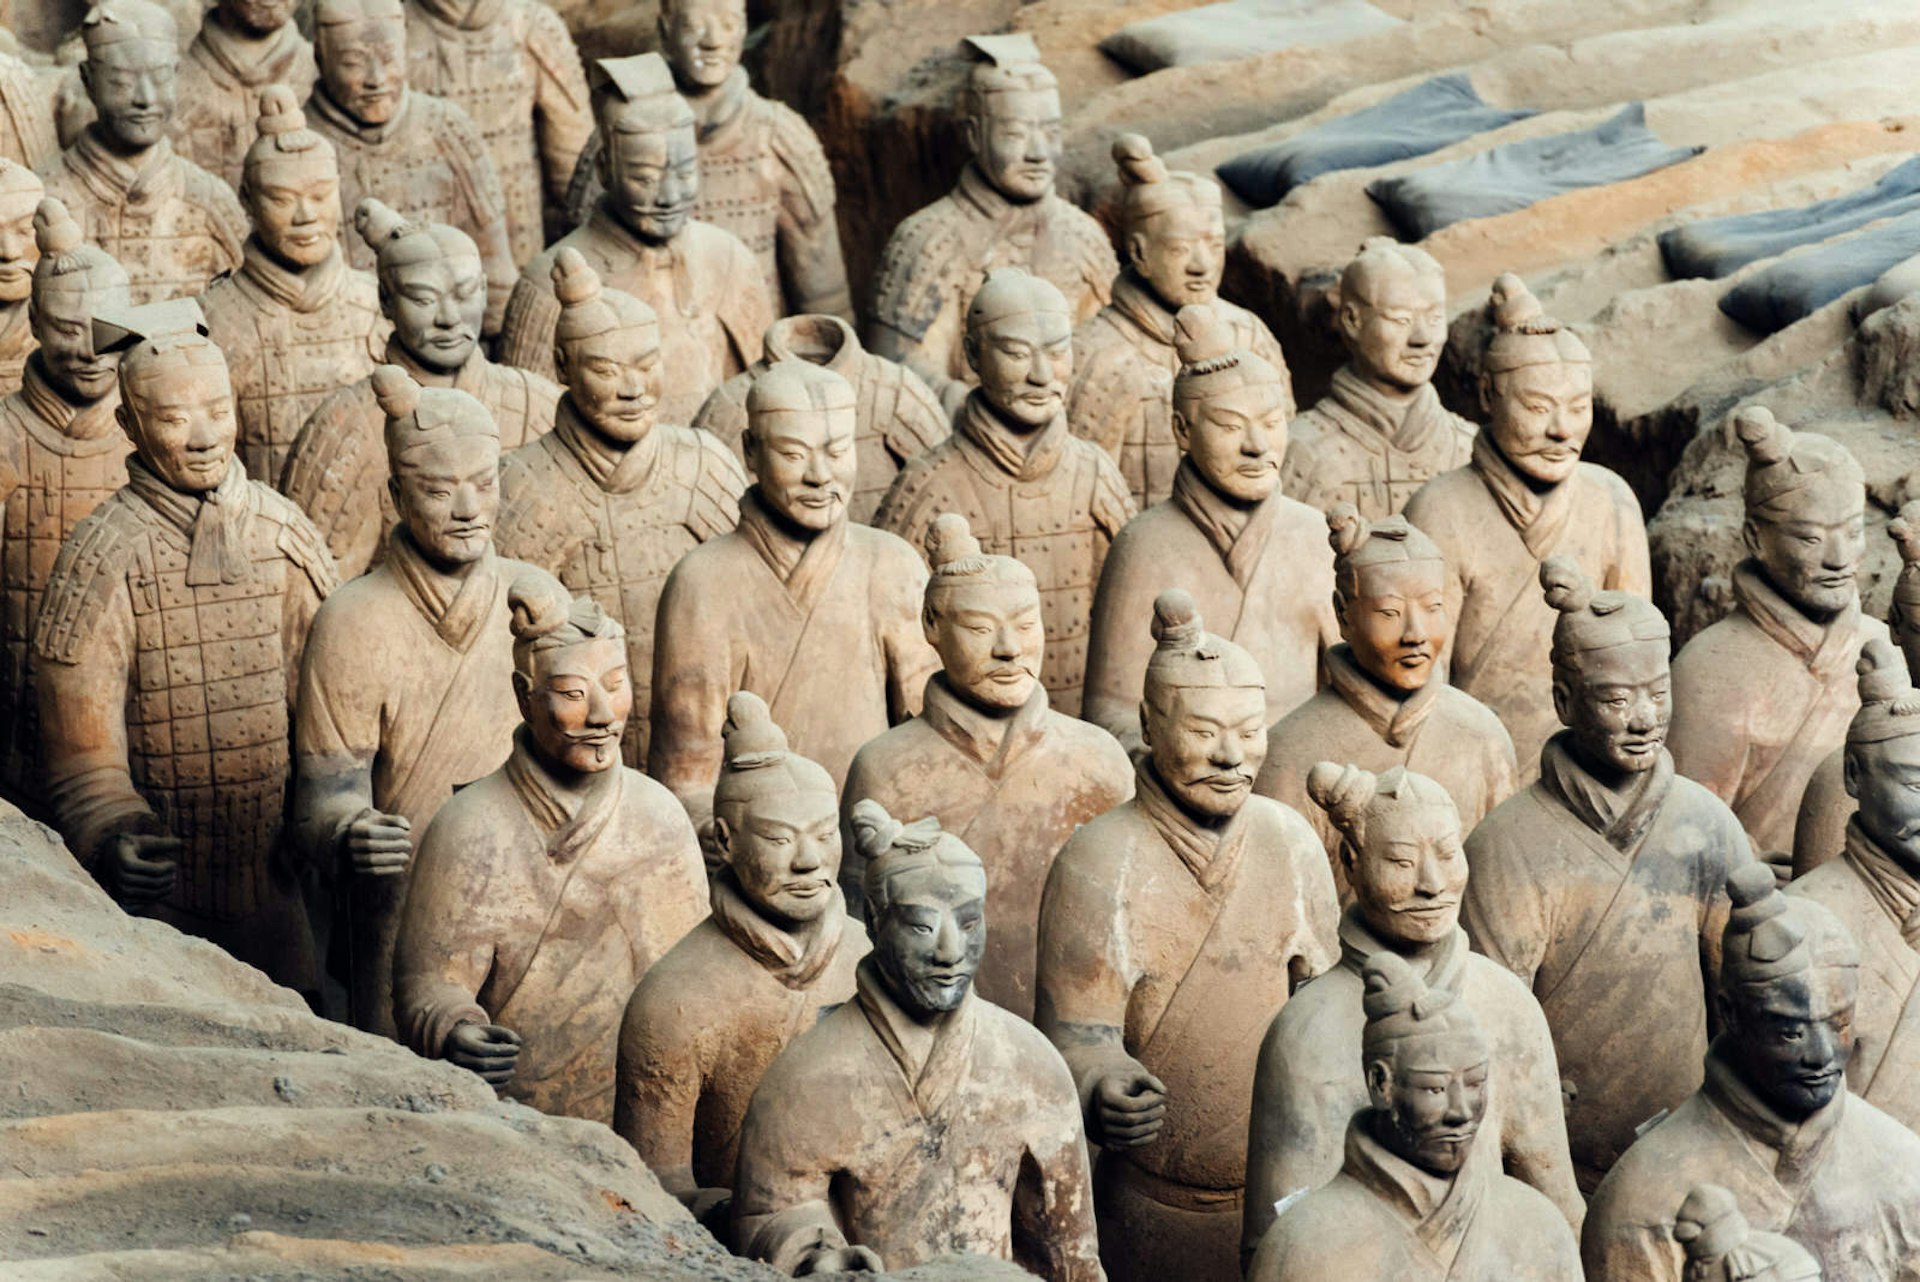 The Terracotta Army: a collection of terracotta sculptures depicting the armies of Qin Shi Huang, the first Emperor of China © Nikada / Getty Images